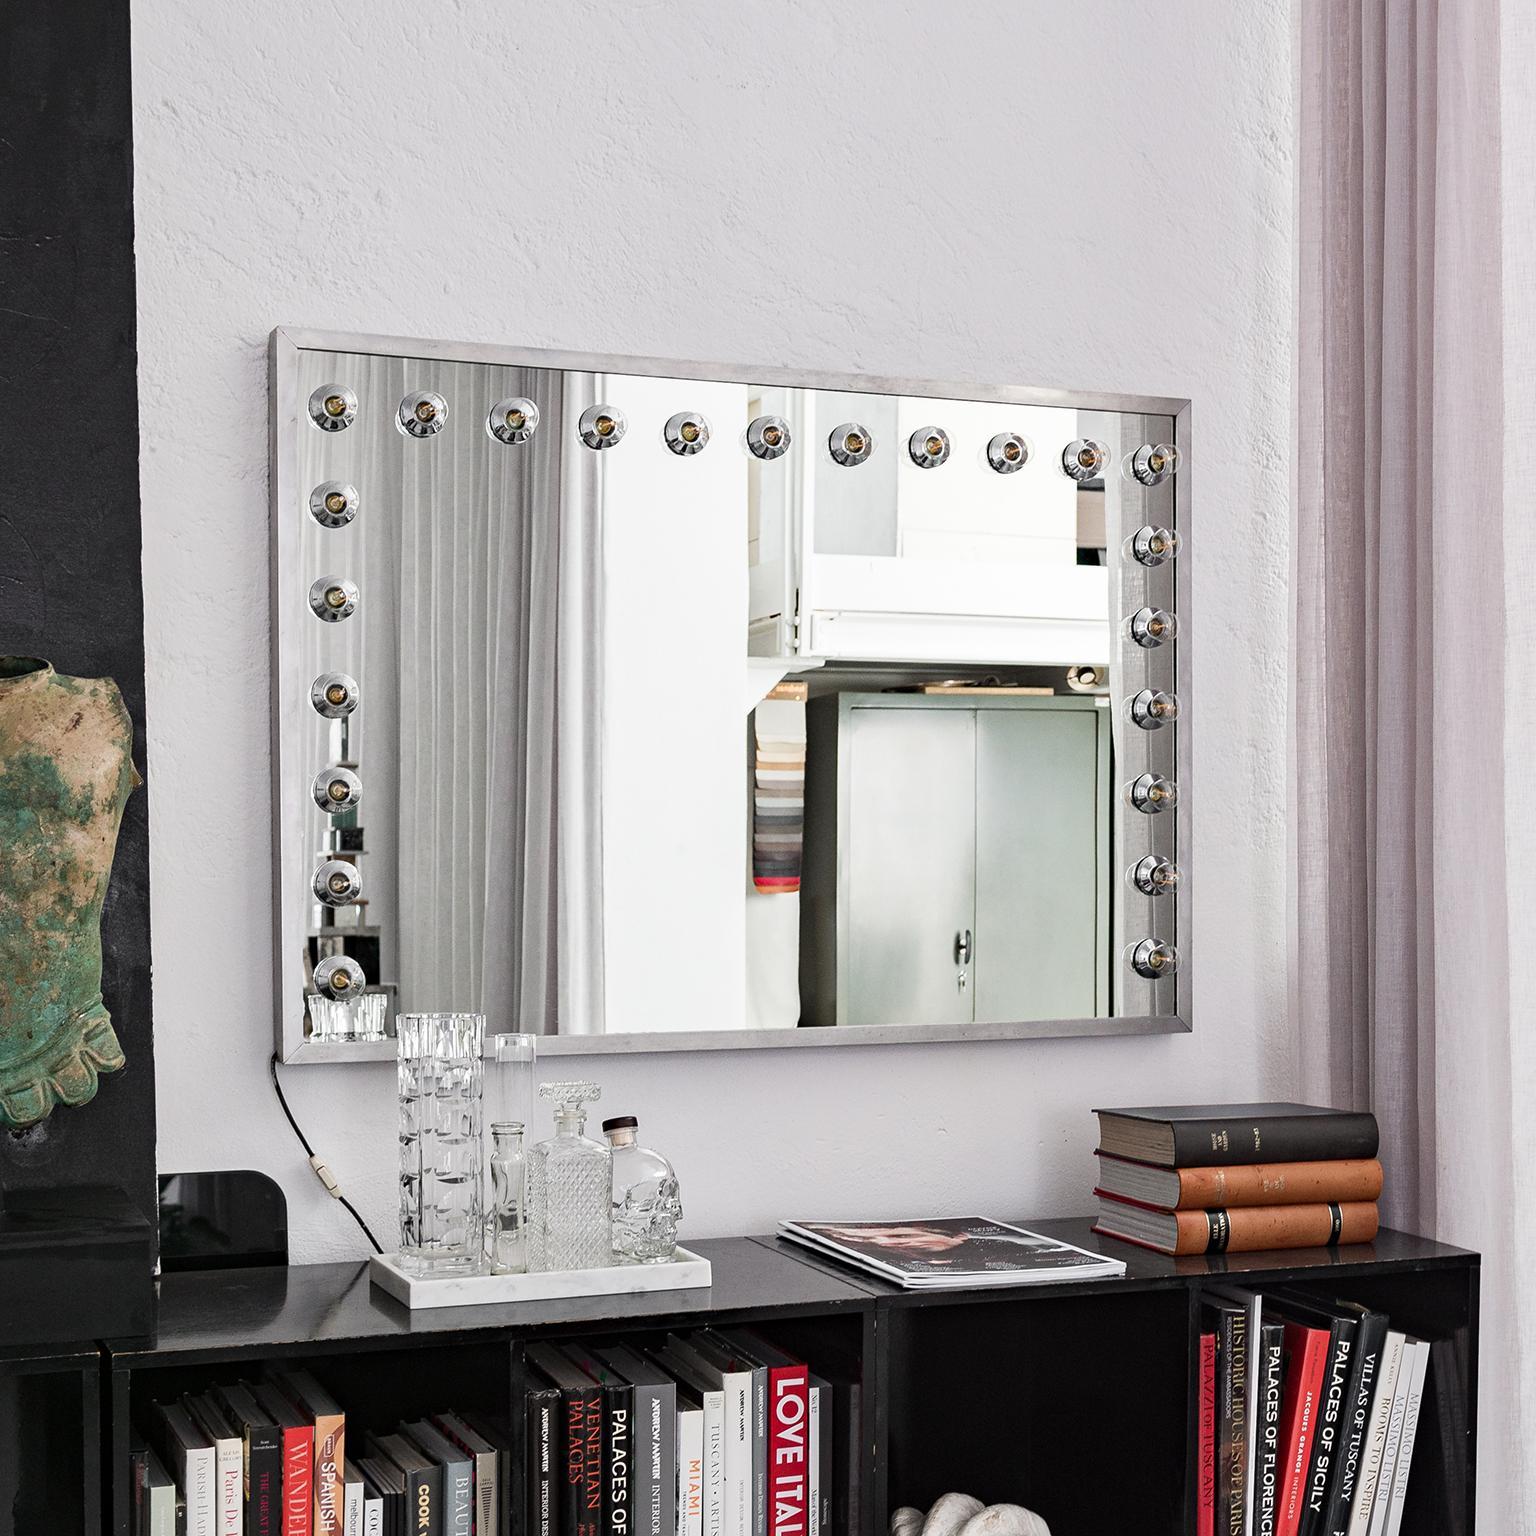 Offered here is a vintage Italian vanity mirror, most likely from the 1970s, equipped with 23 lights mounted on three edges of the mirror. It is very large and preserved in very good conditions. It is a very cool and original complement for any kind